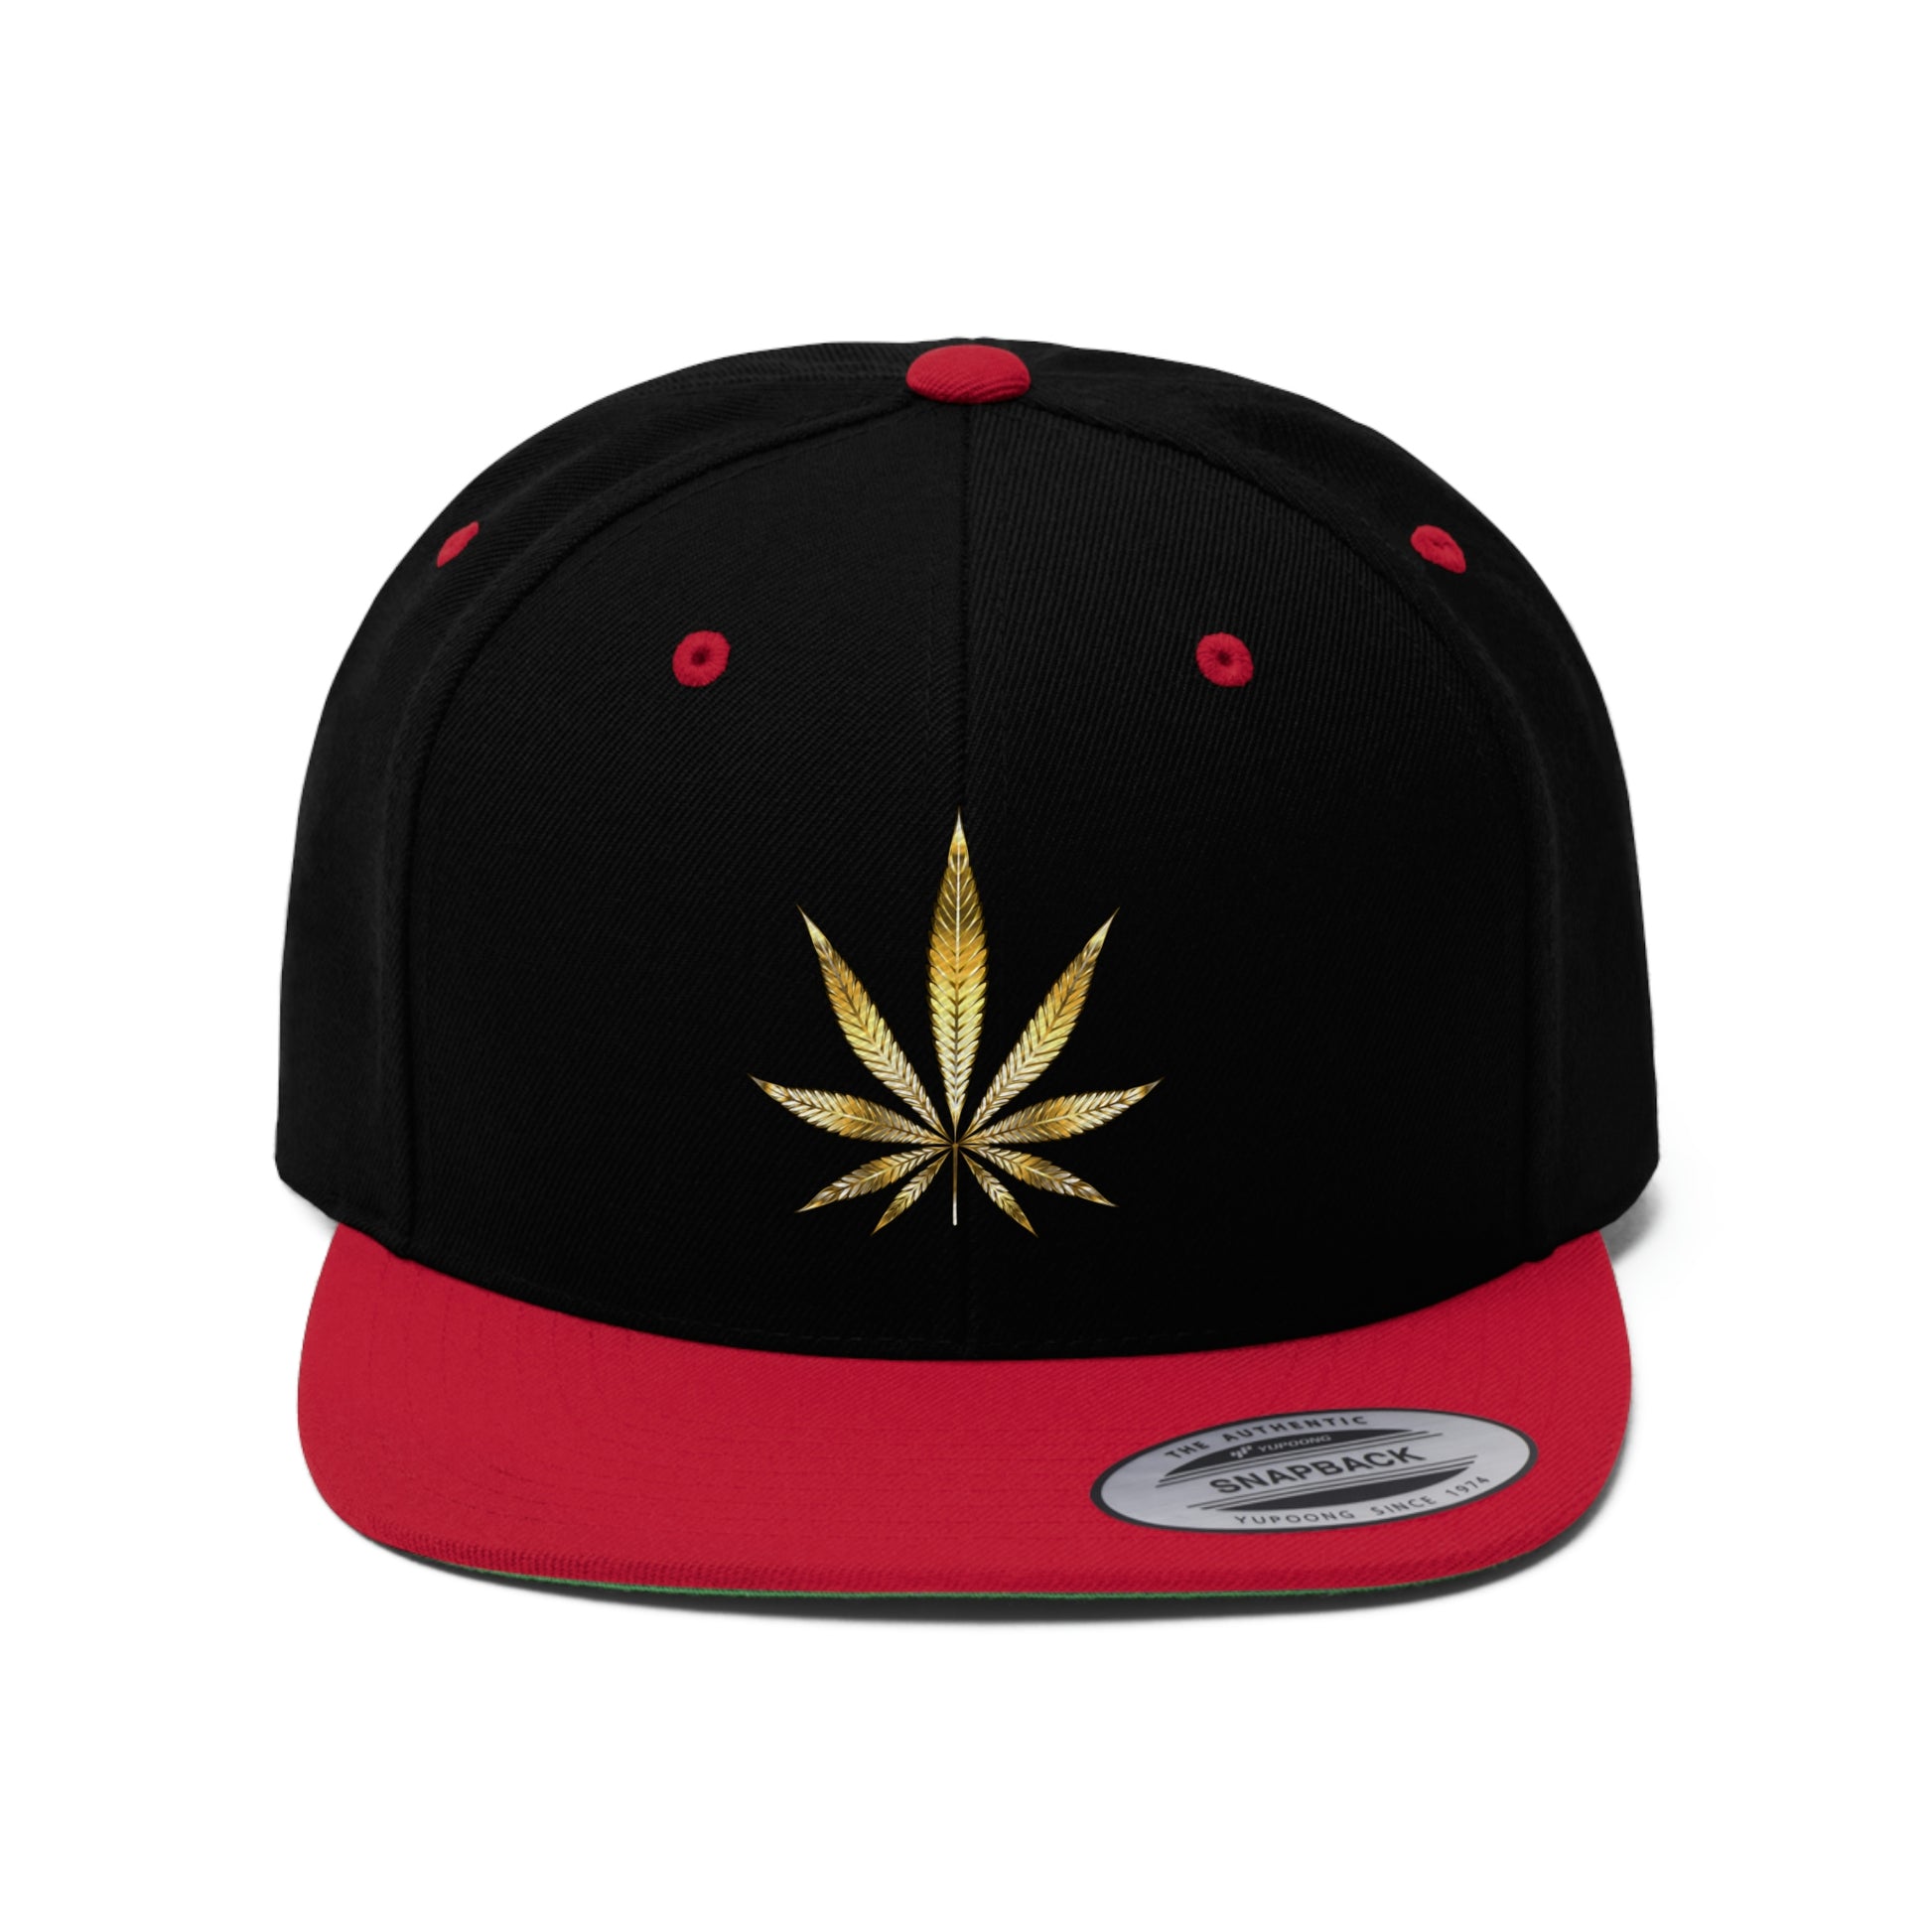 A close up of the black and red Gold Marijuana Leaf Snapback Hat